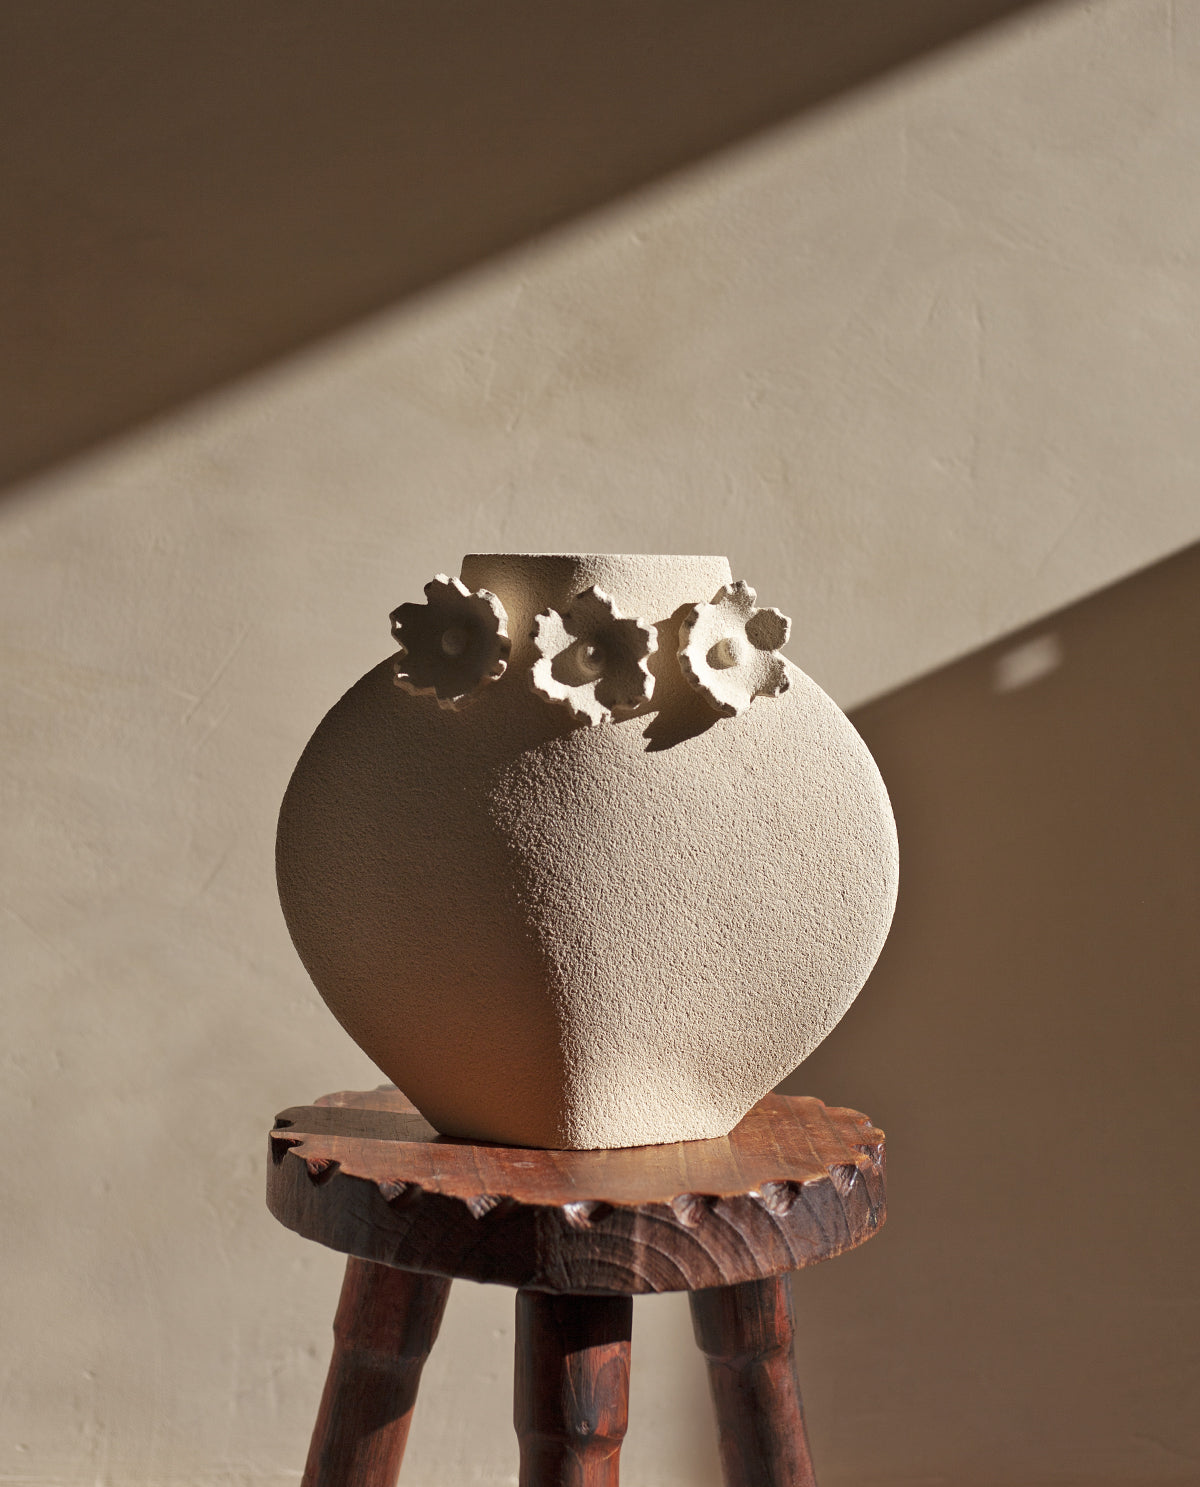 Handmade floral vase by INI CERAMIQUE with flower sculptures and textured finish